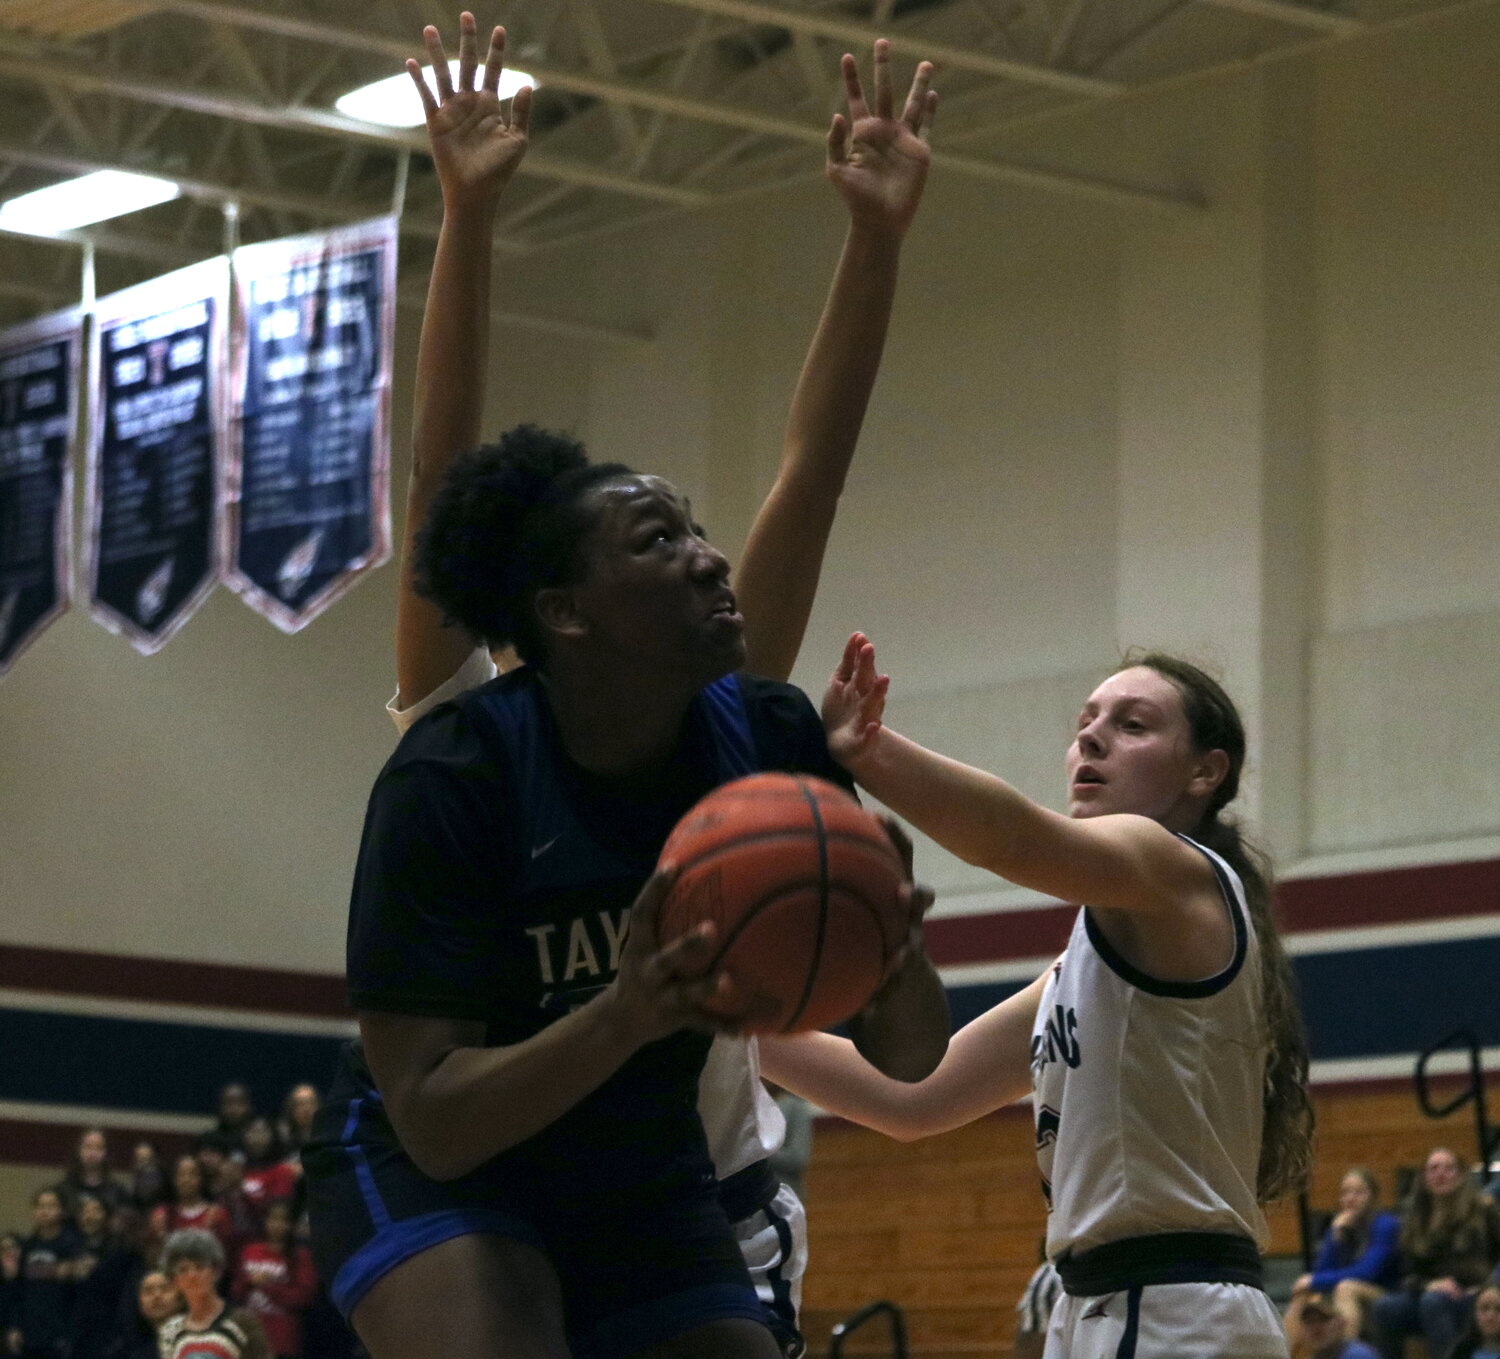 Timya Grice goes up for a shot during Friday's game between Taylor and Tompkins at the Tompkins gym.